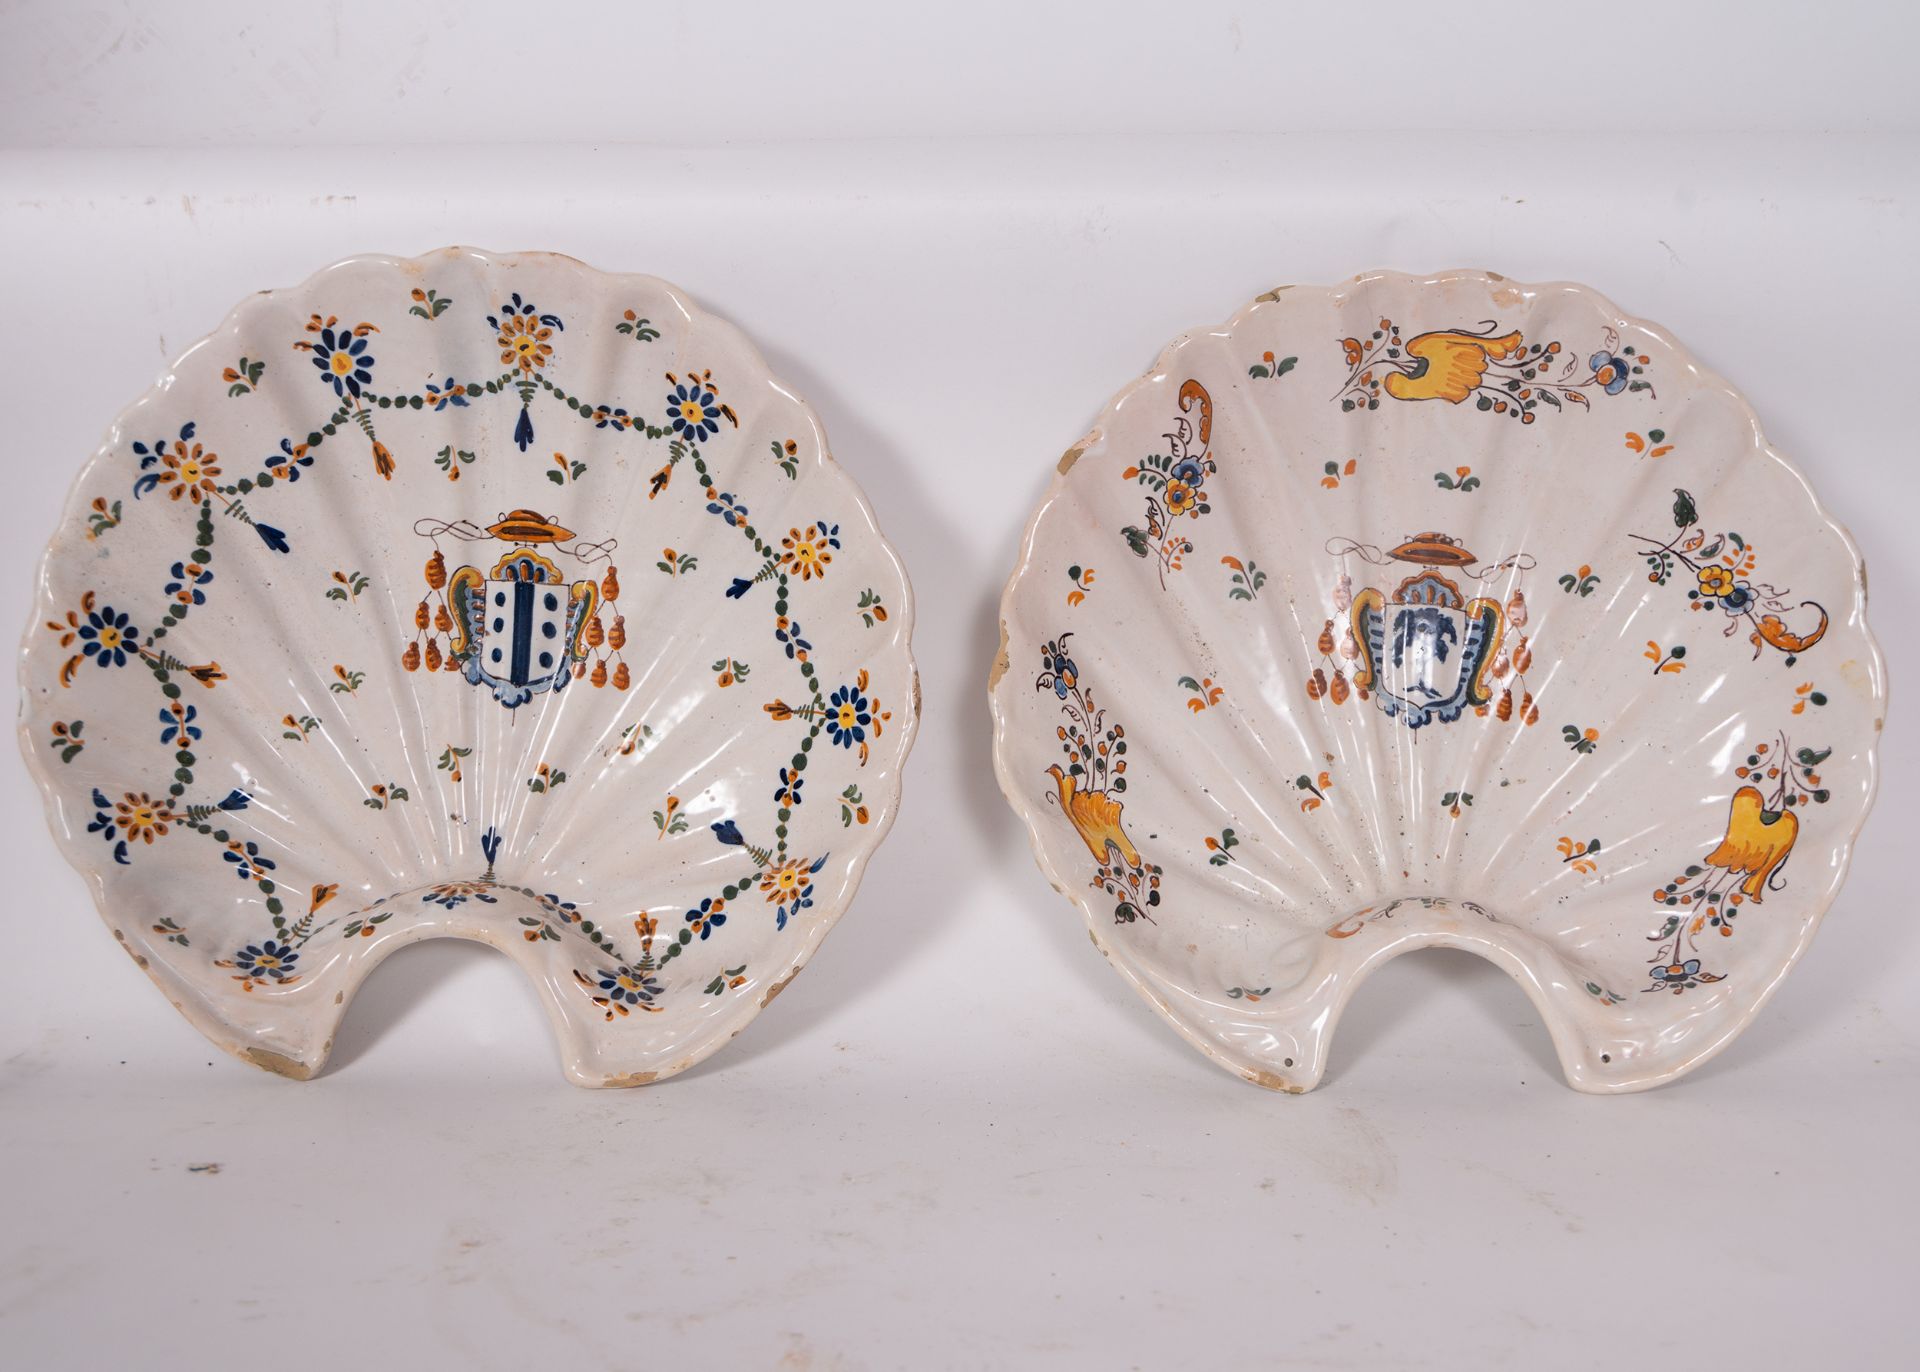 Pair of Bacias from Talavera with Archbishop's coat of arms, second half of the 18th century